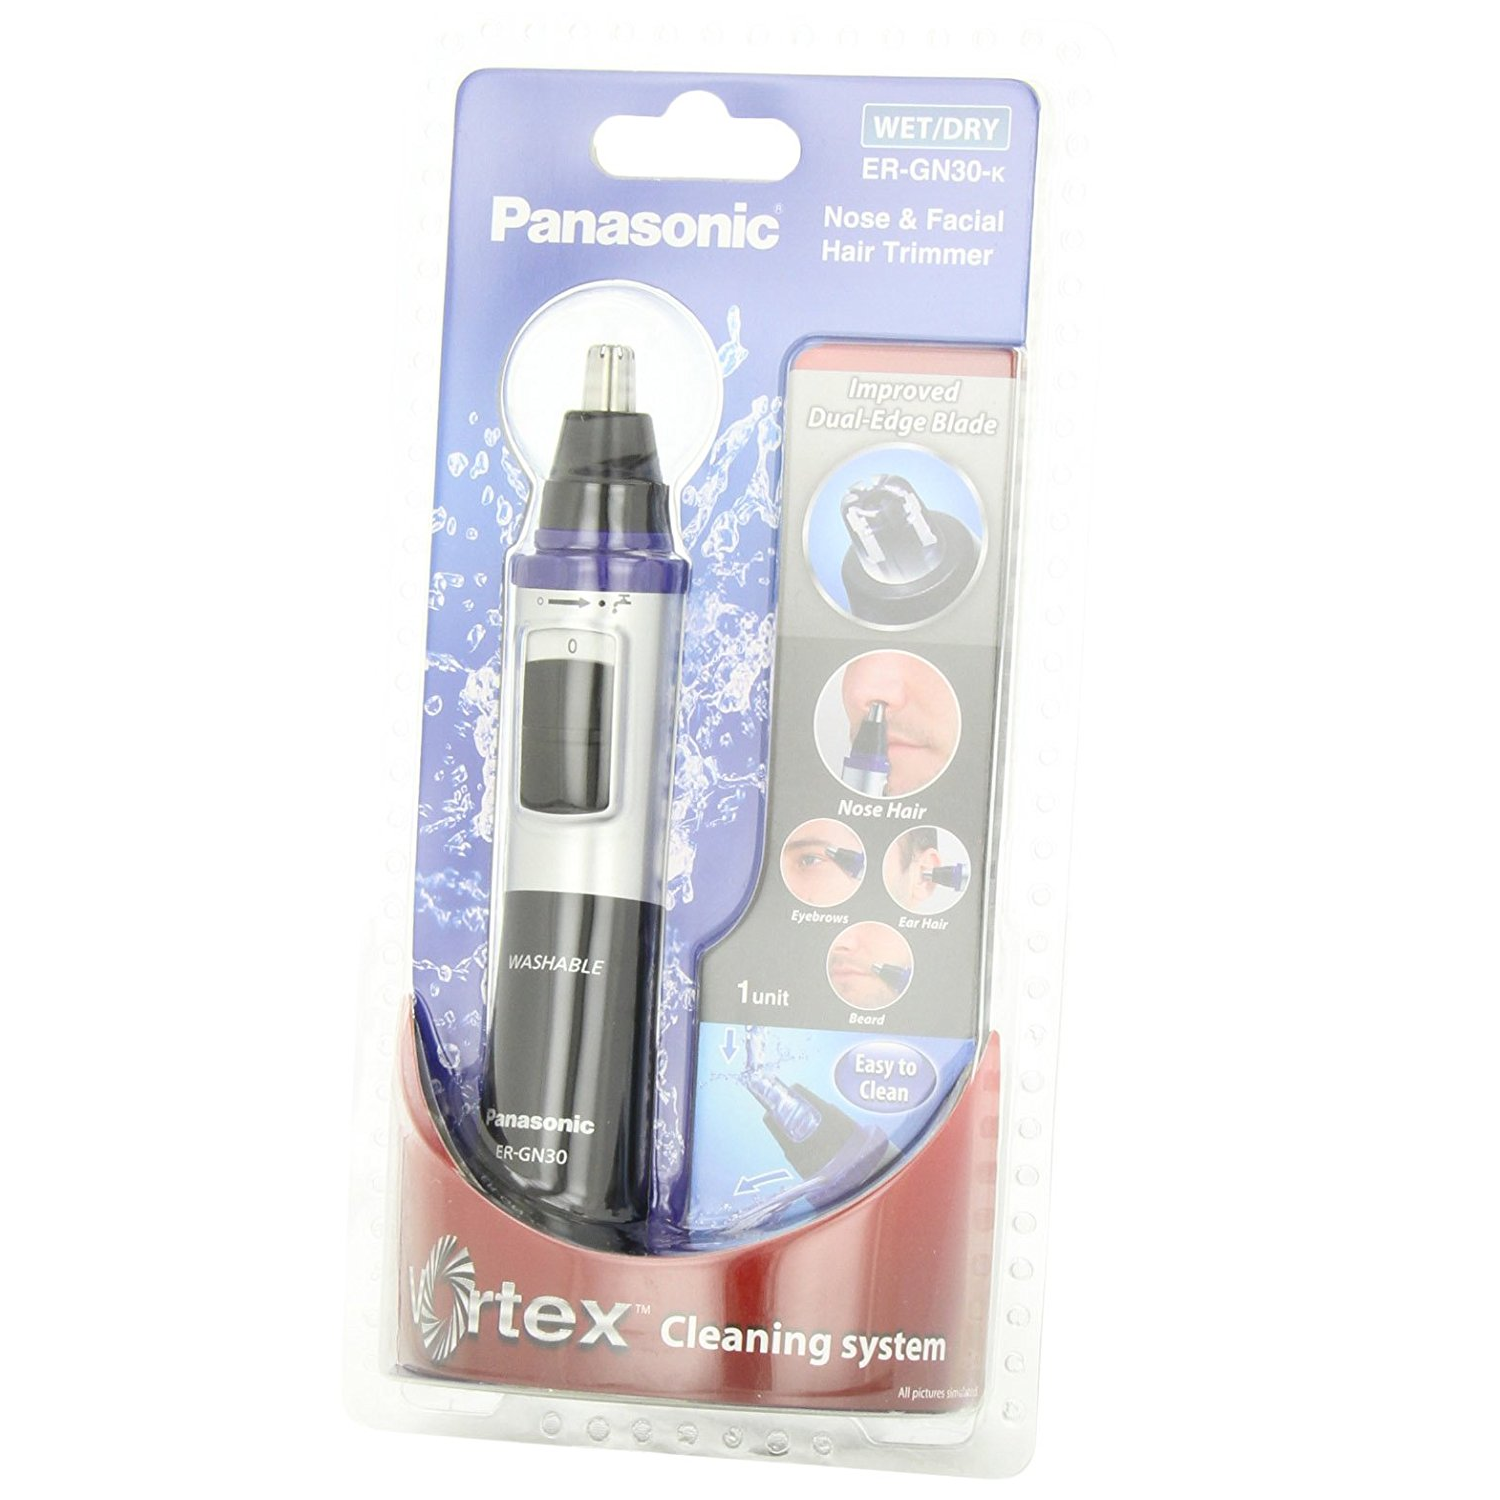 Panasonic ER-GN30-K Nose Ear & Hair Trimmer Just $9.99! Highly Rated w/ Great Reviews!